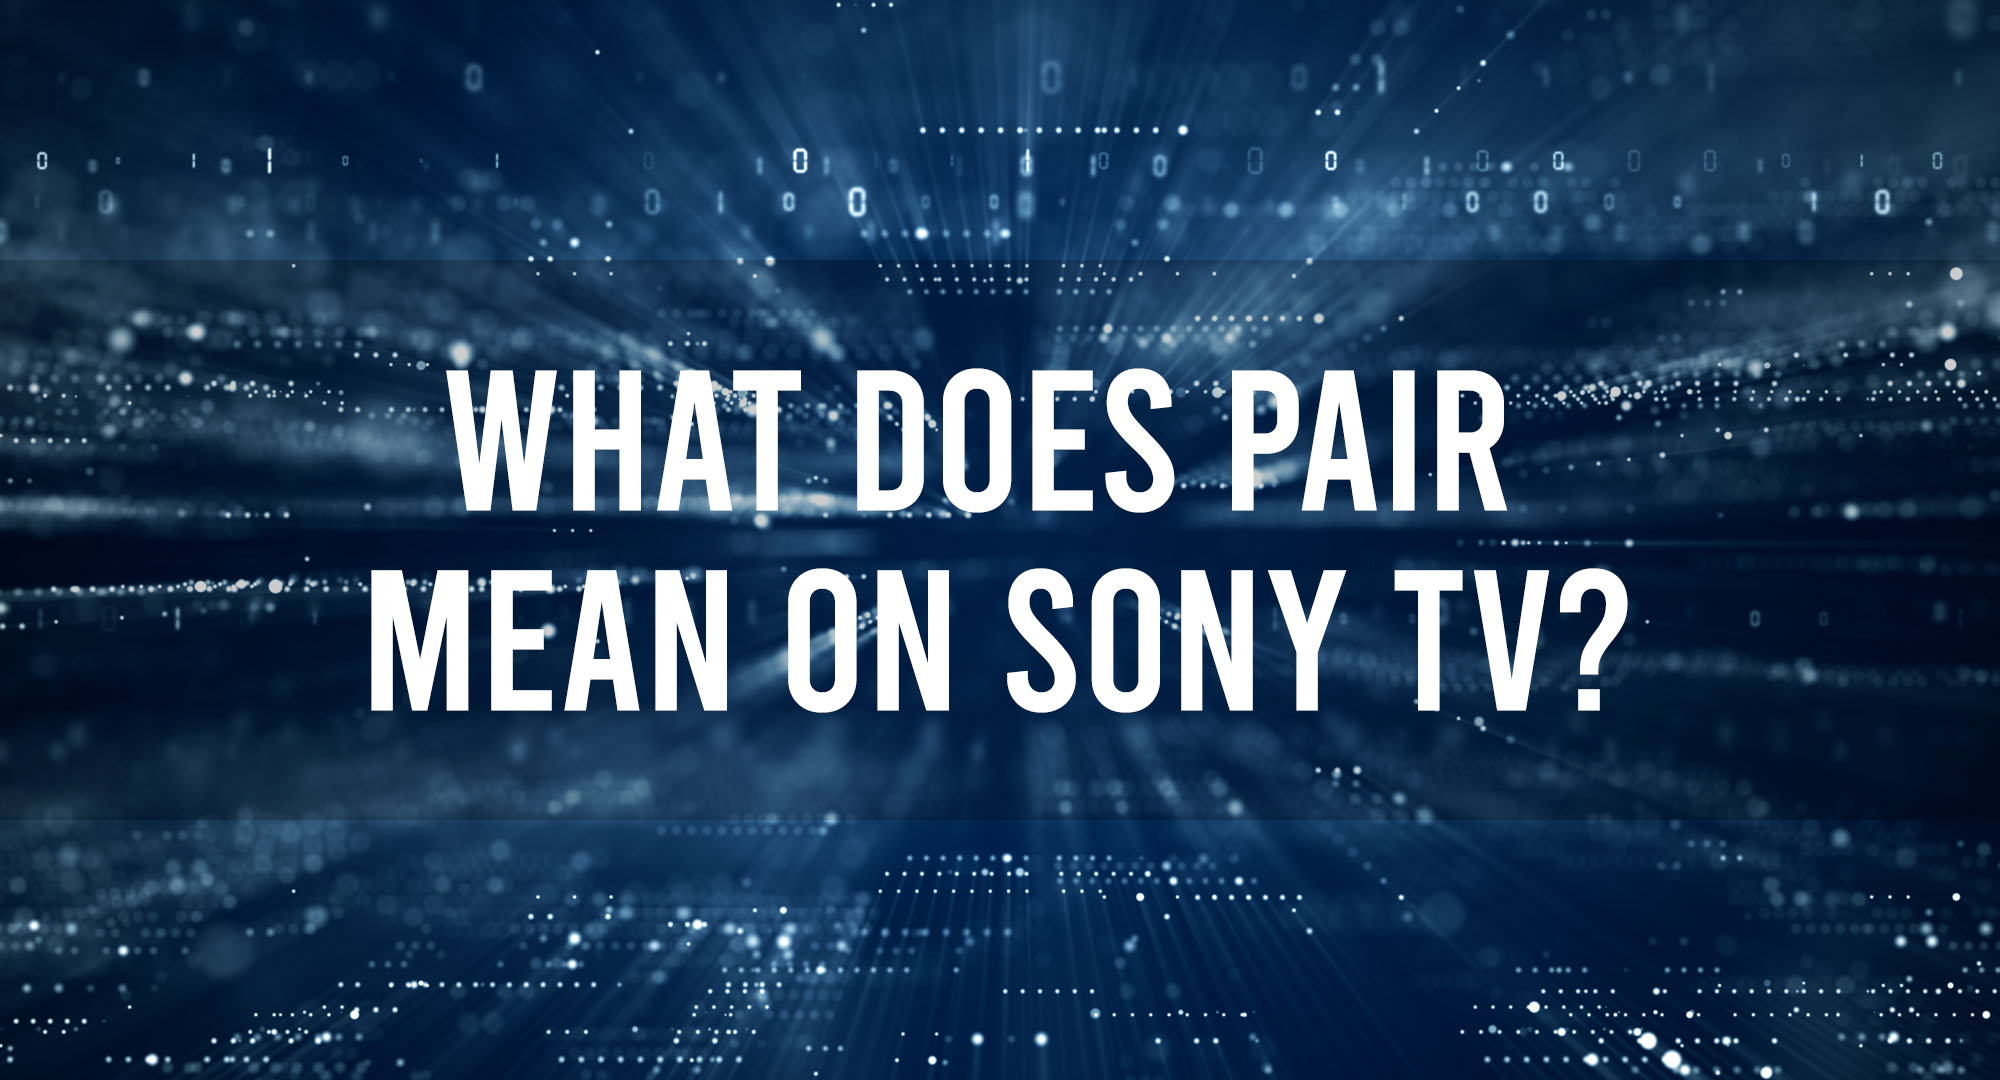 What does pair mean on SONY TV